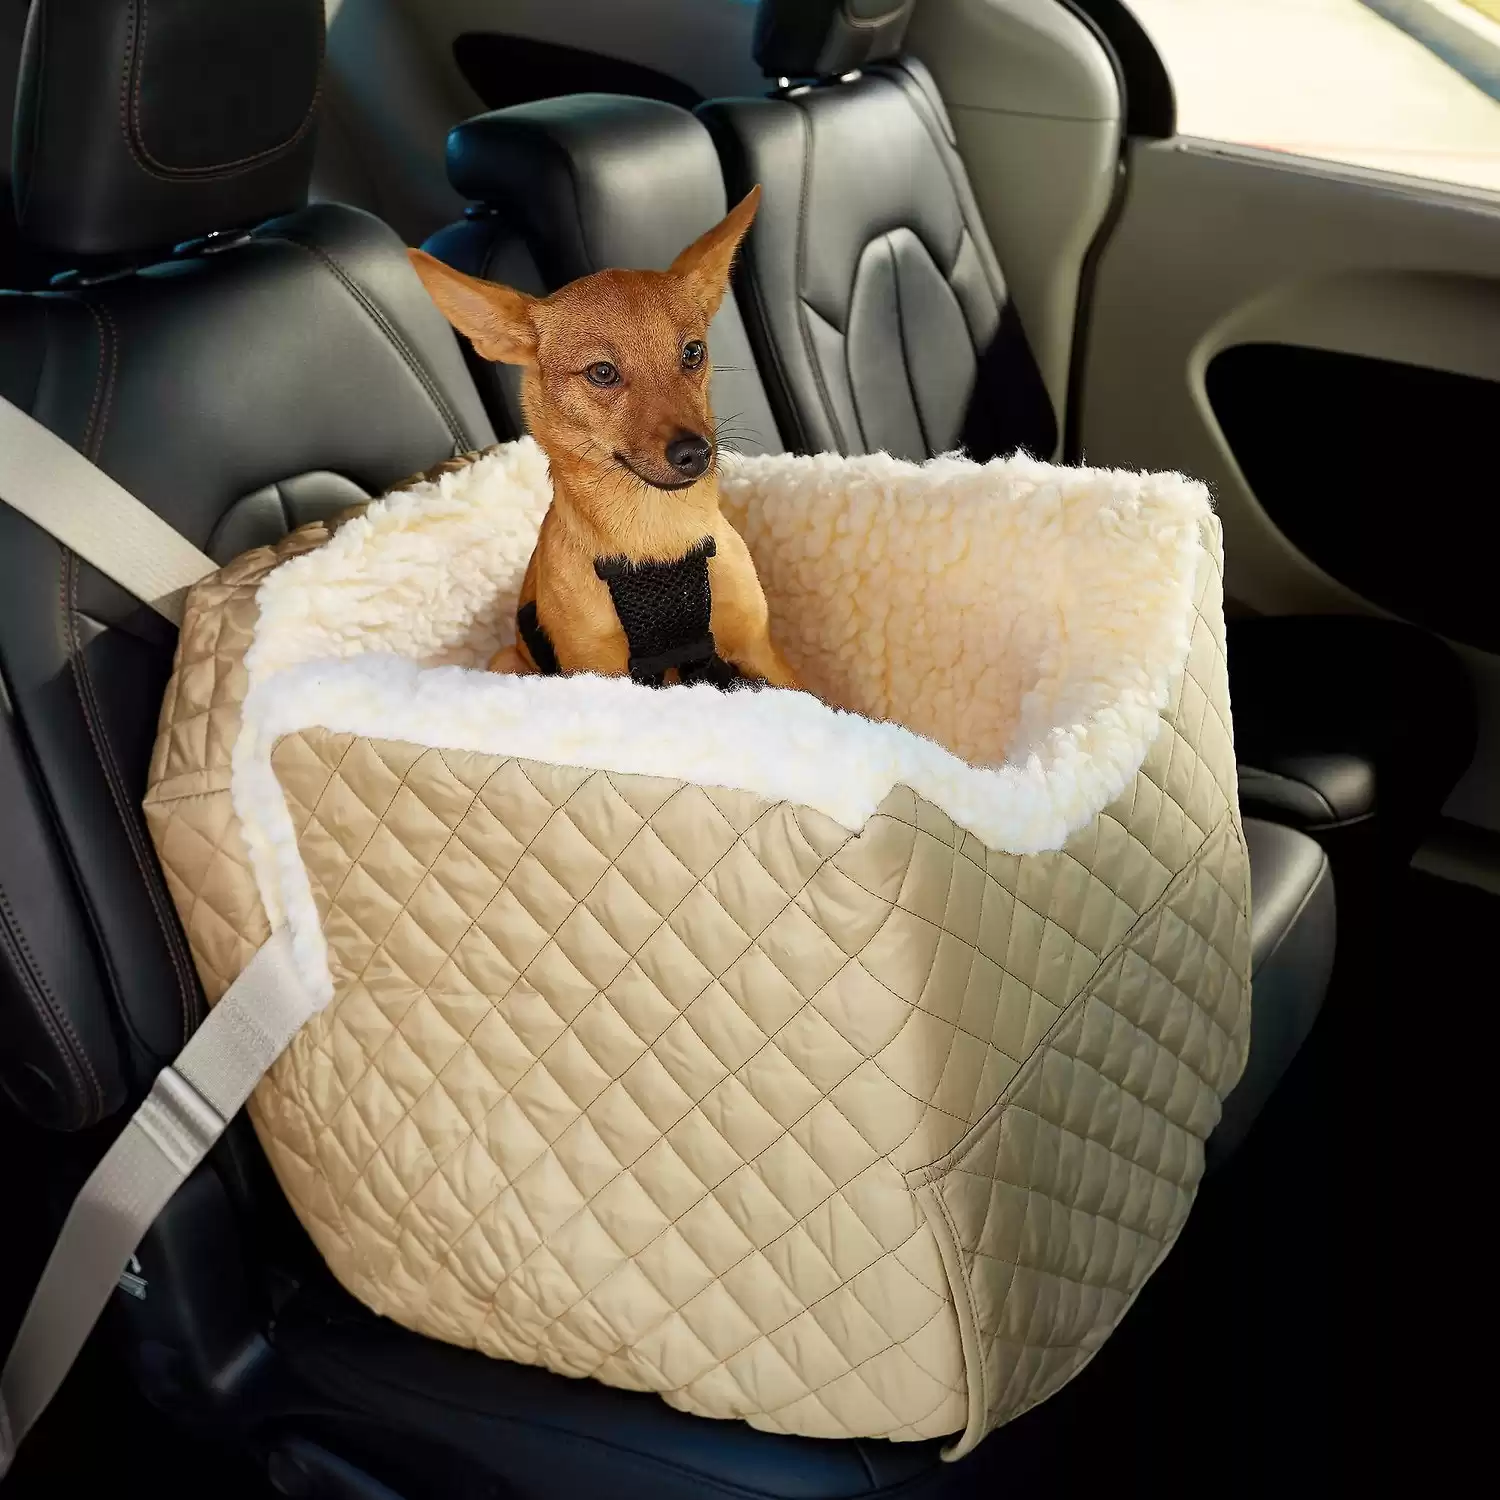 Snoozer Pet Products Lookout II Car Seat